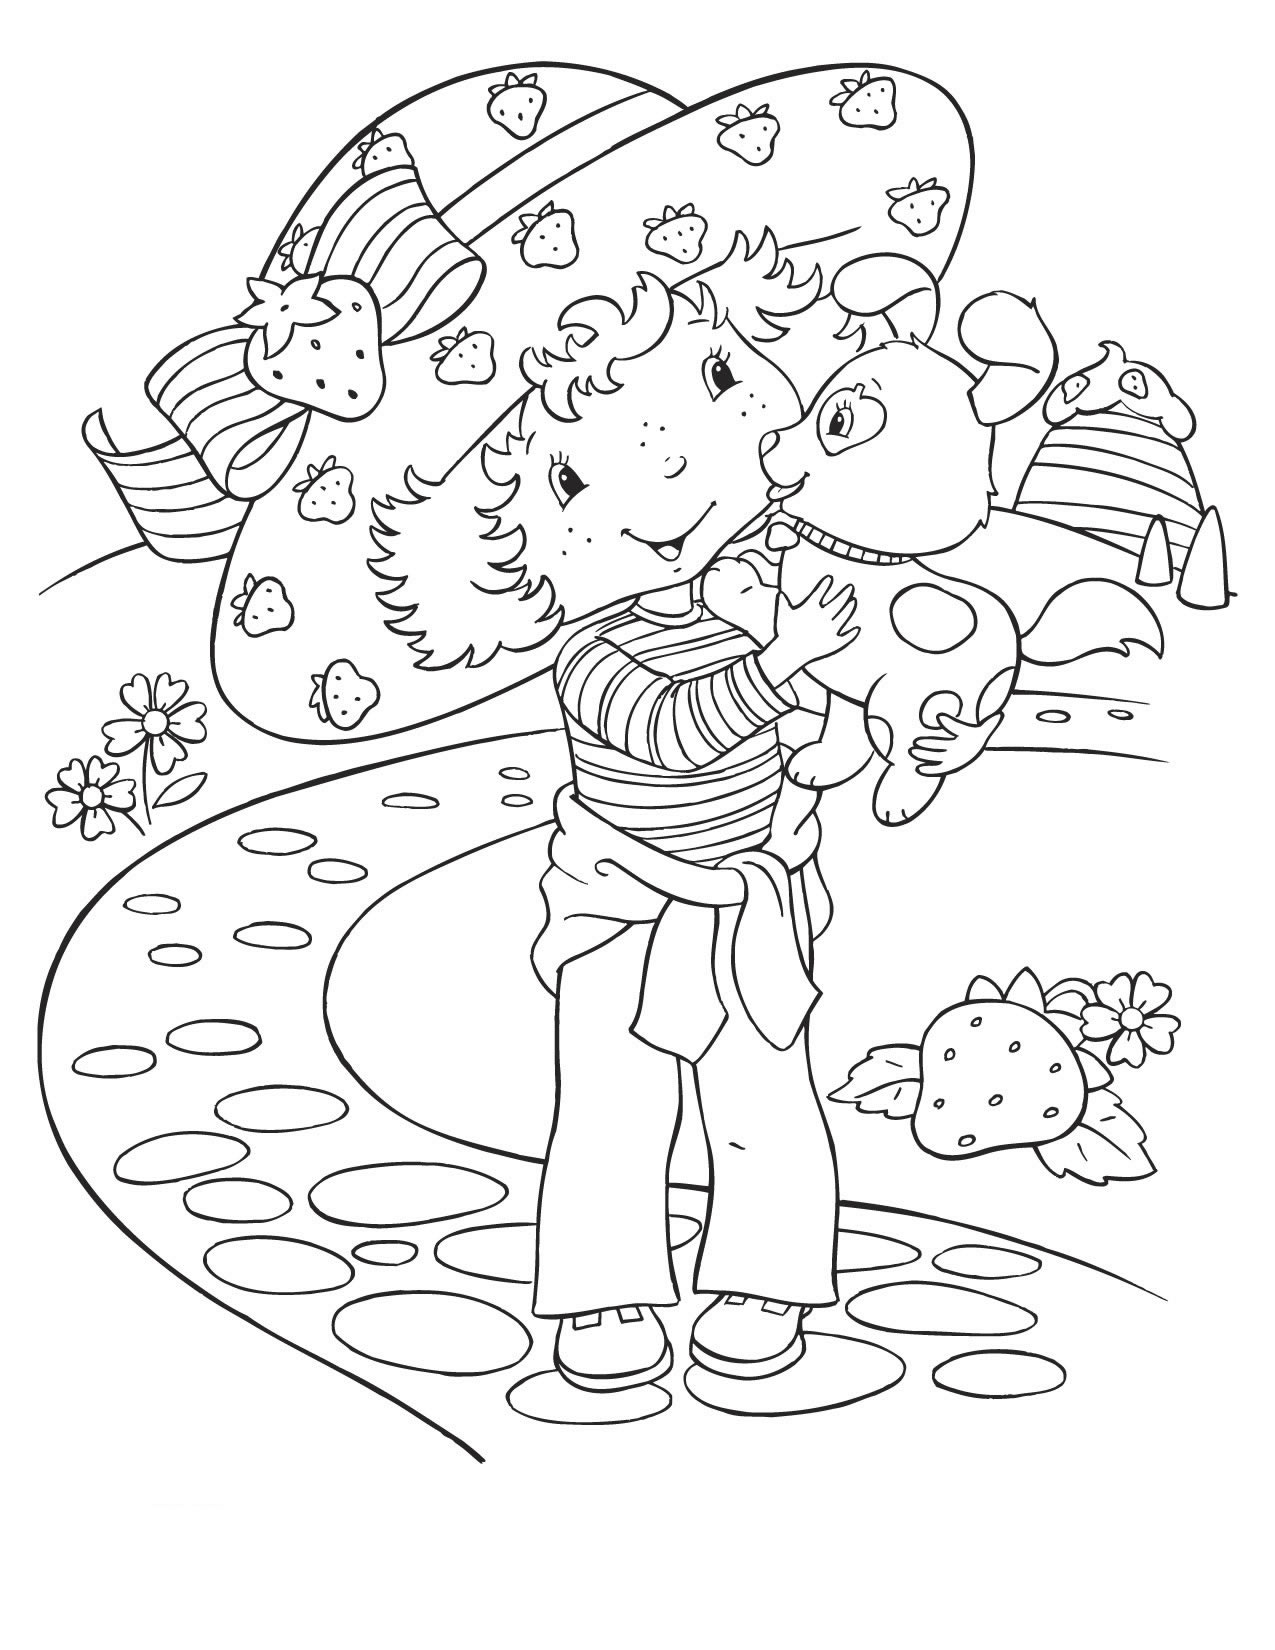 Download Strawberry shortcake for kids - Strawberry Shortcake Kids Coloring Pages